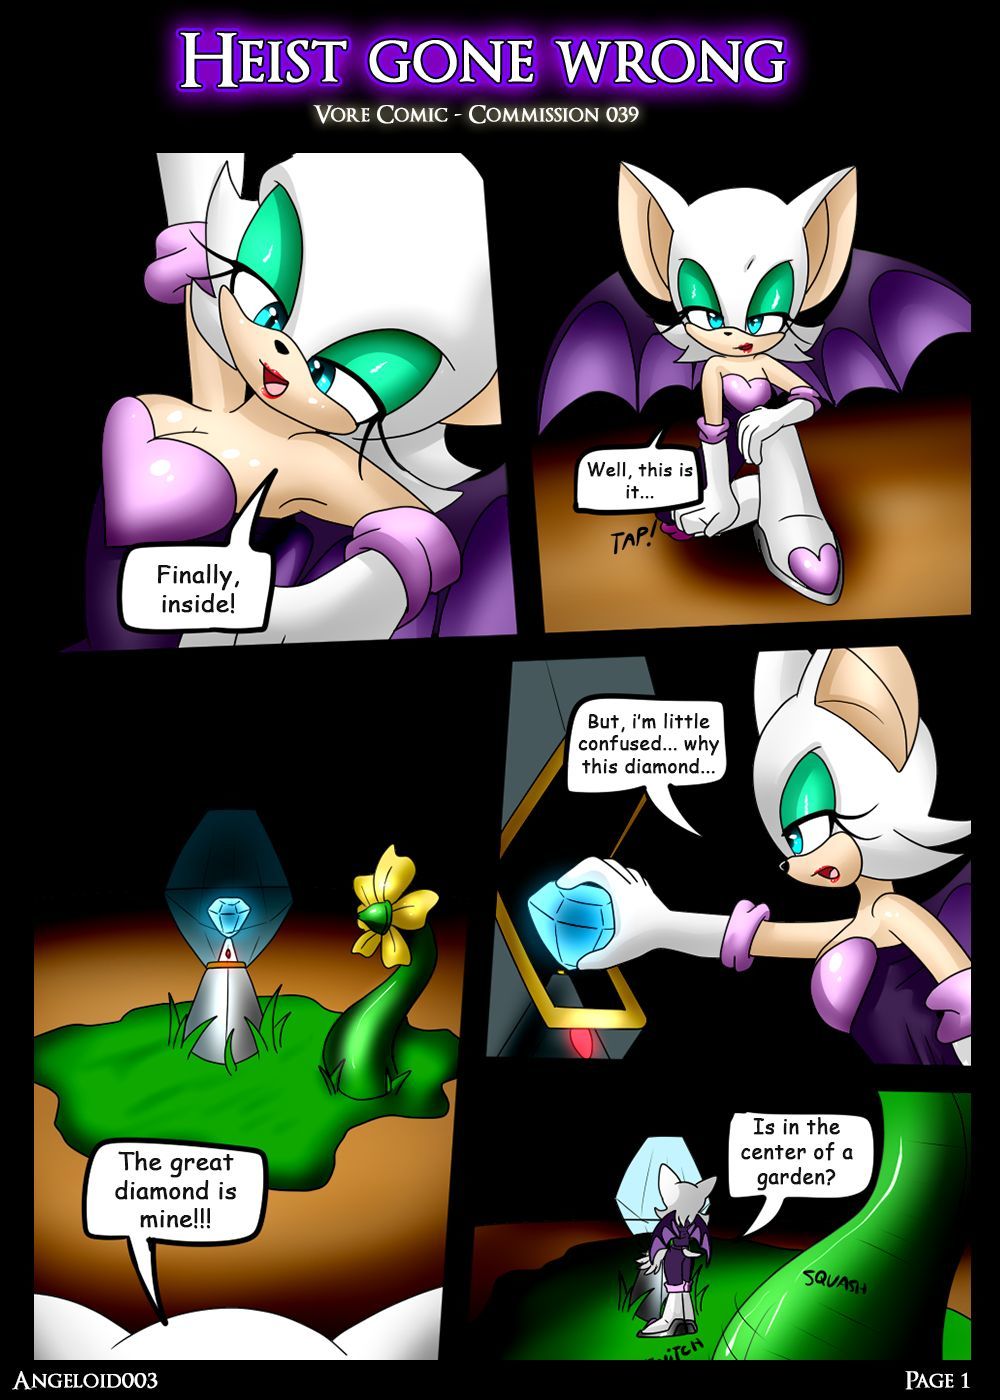 Heist Gone Wrong - Angeloid003 [Sonic The Hedgehog] page 1